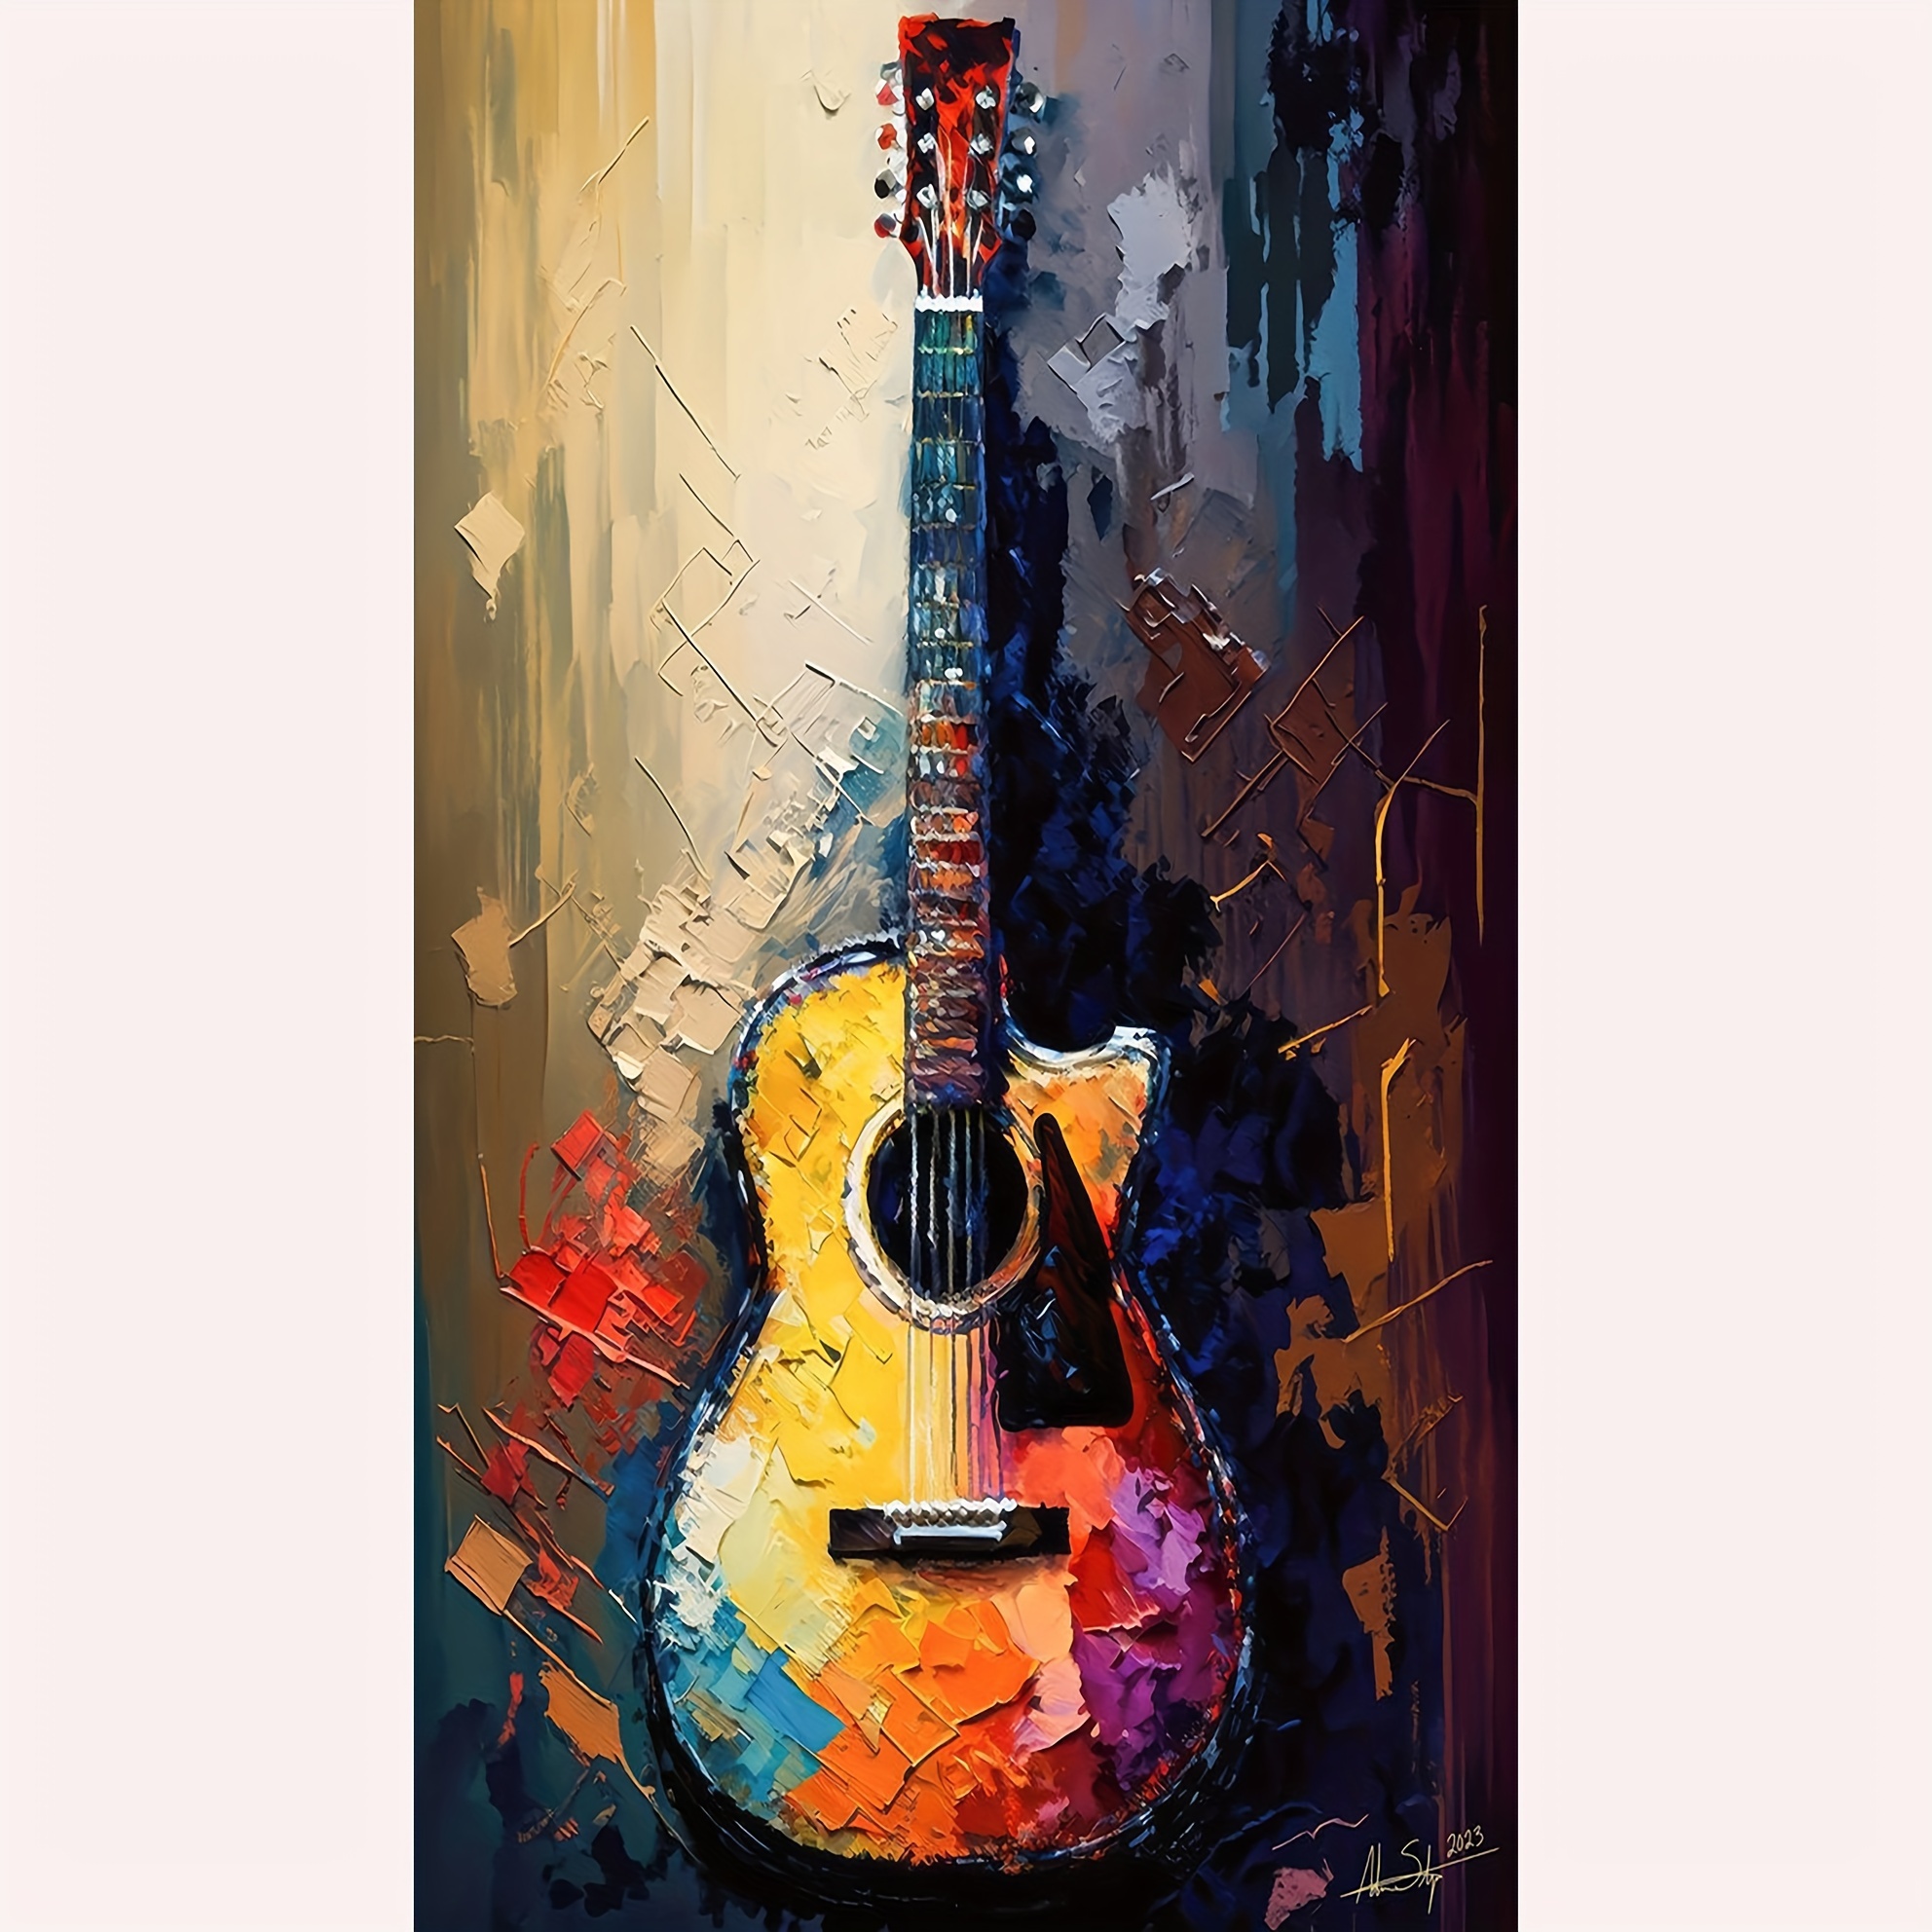 

Guitar Diamond Art Painting Kit 5d Diamond Art Set Painting With Diamond Gems, Arts And Crafts For Home Wall Decor 40x70cm/15.7x27.5in